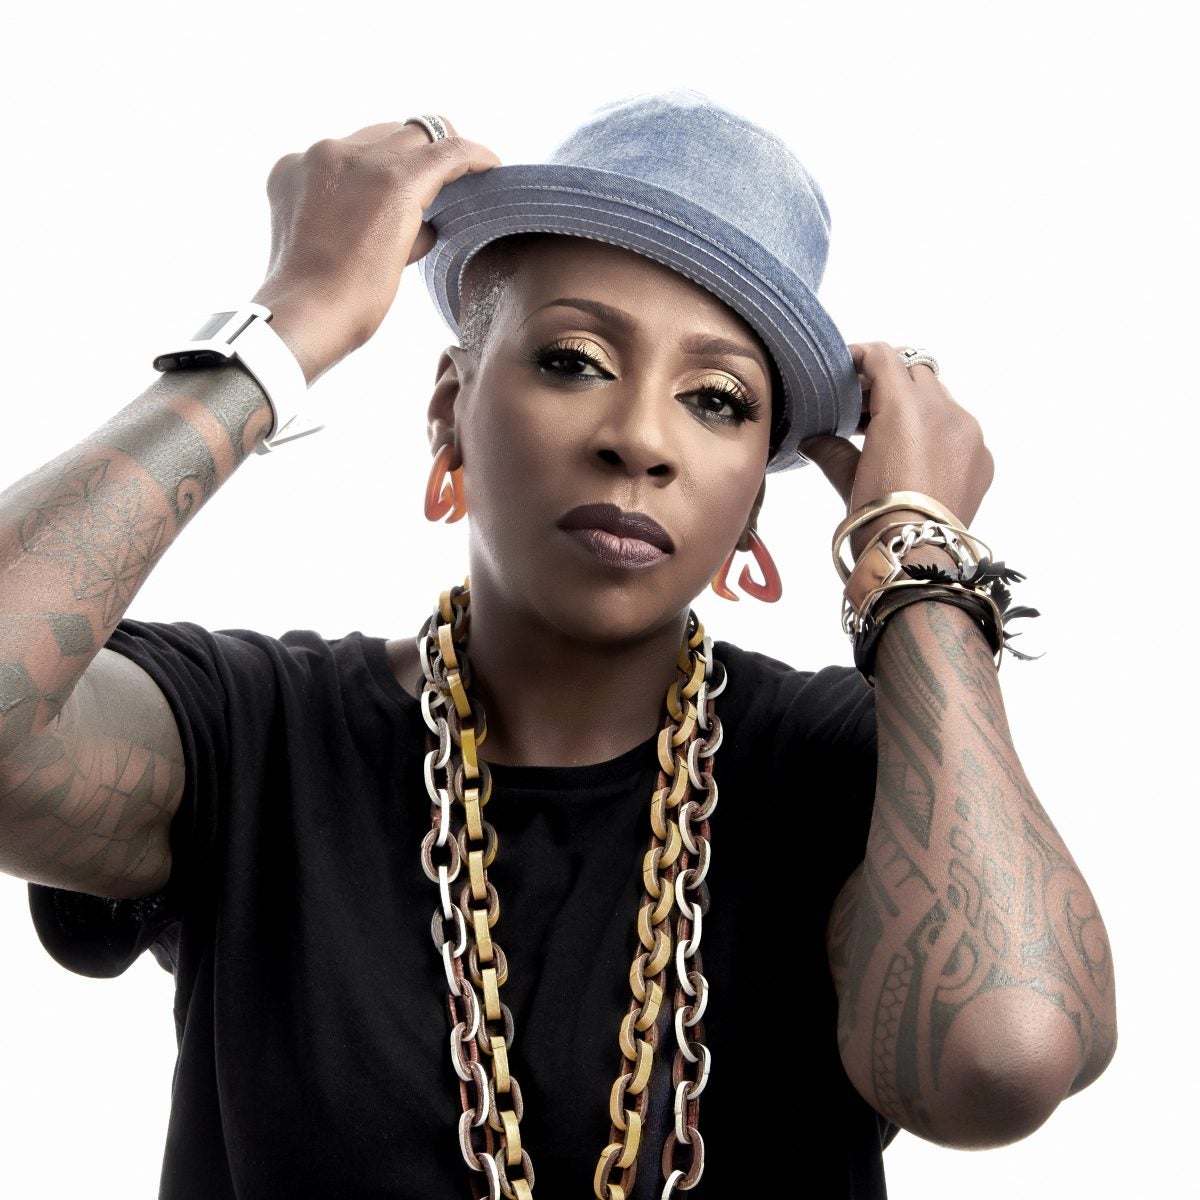 'Bob Hearts Abishola' Co-Creator Gina Yashere Sets the Record Straight About the Show